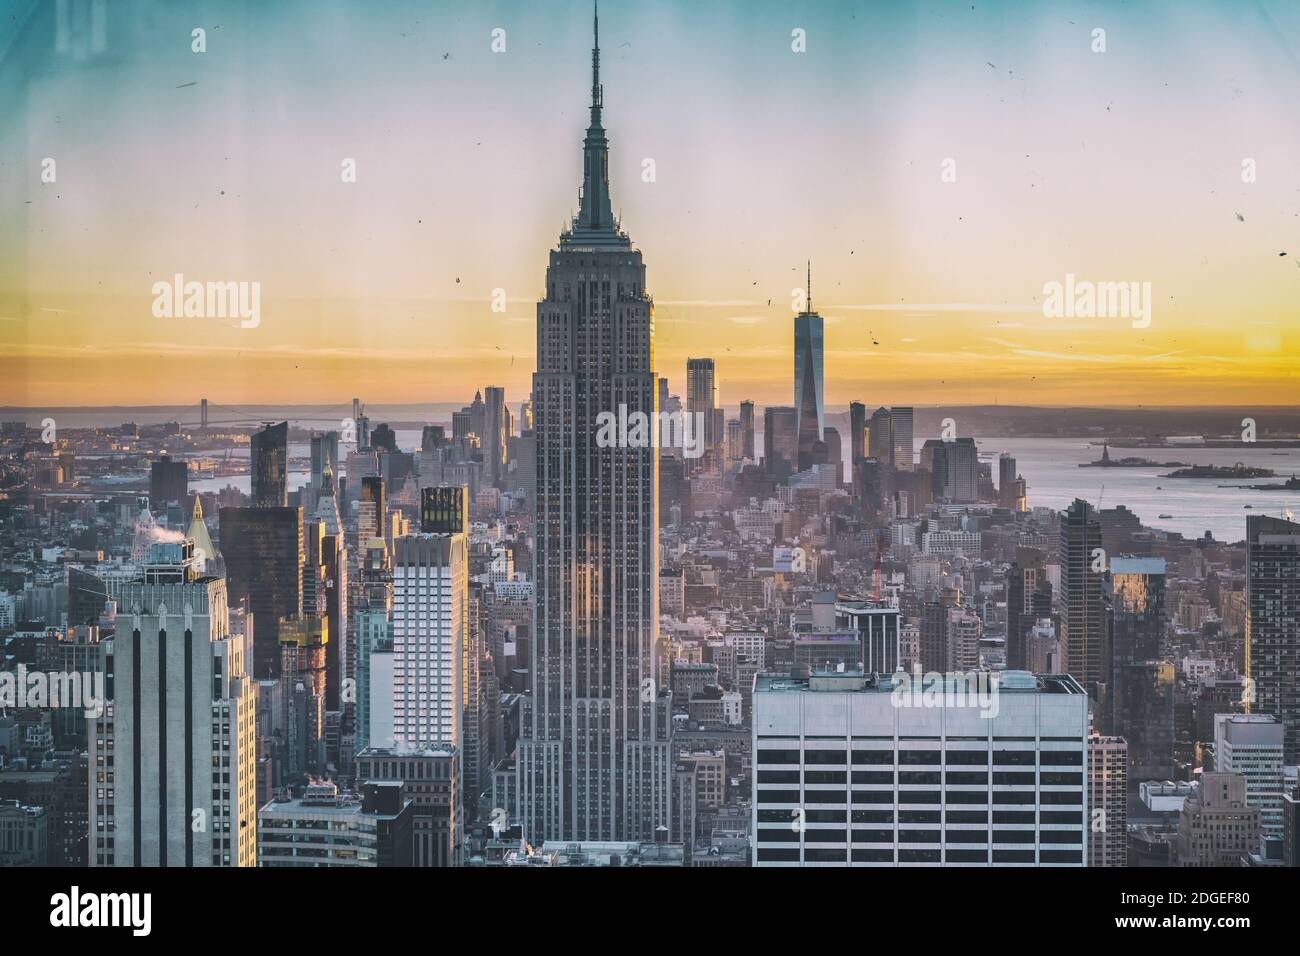 Amazing aerial view of Manhattan skyline from a vantage viewpoint Stock Photo